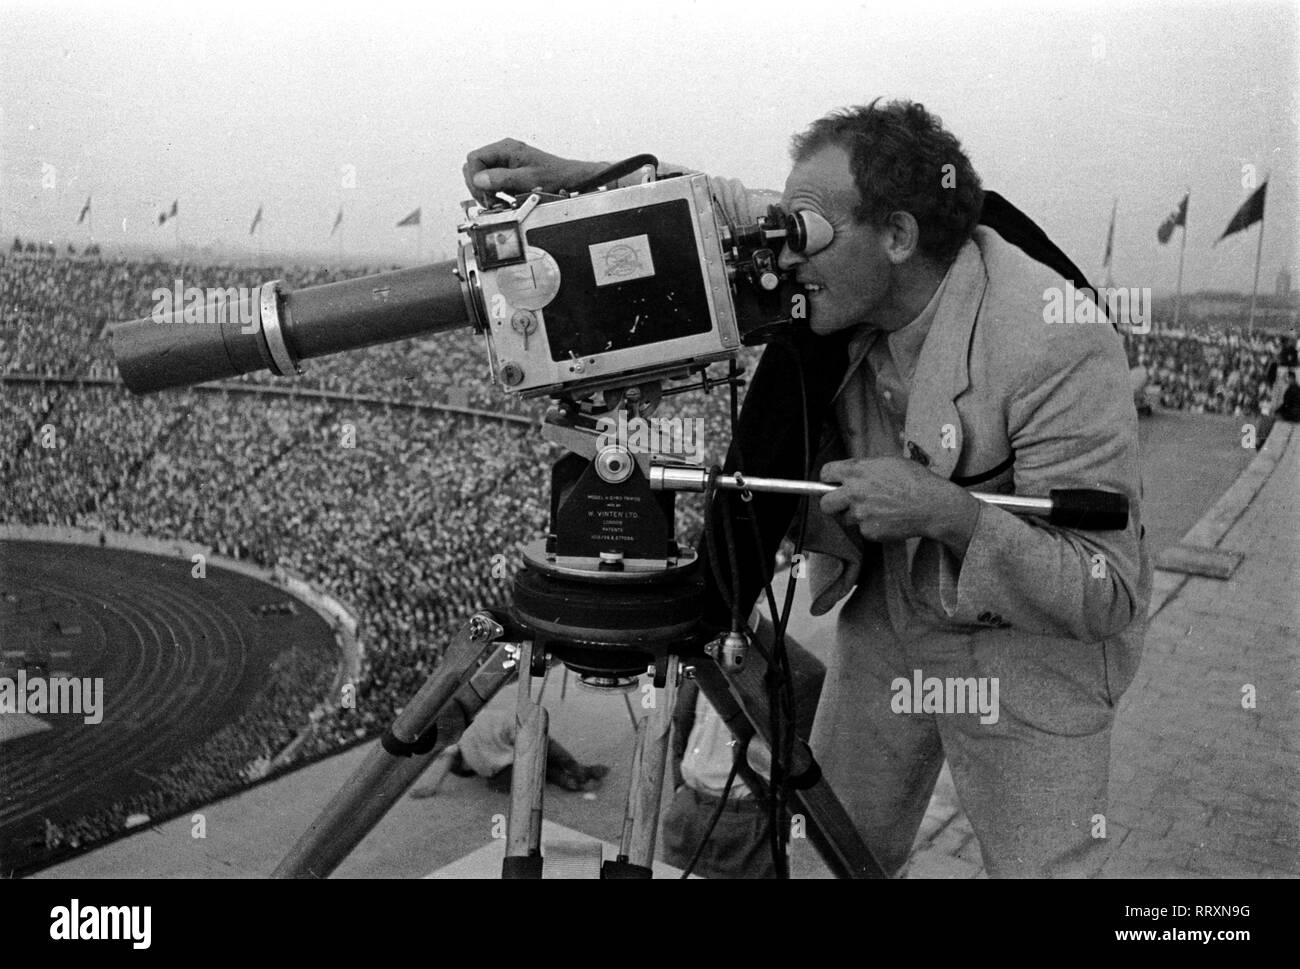 Summer Olympics 1936 - Germany, Third Reich - Olympic Games, Summer  Olympics 1936 in Berlin. Cameraman at the Olympic arena. Image date August  1936. Photo Erich Andres Stock Photo - Alamy